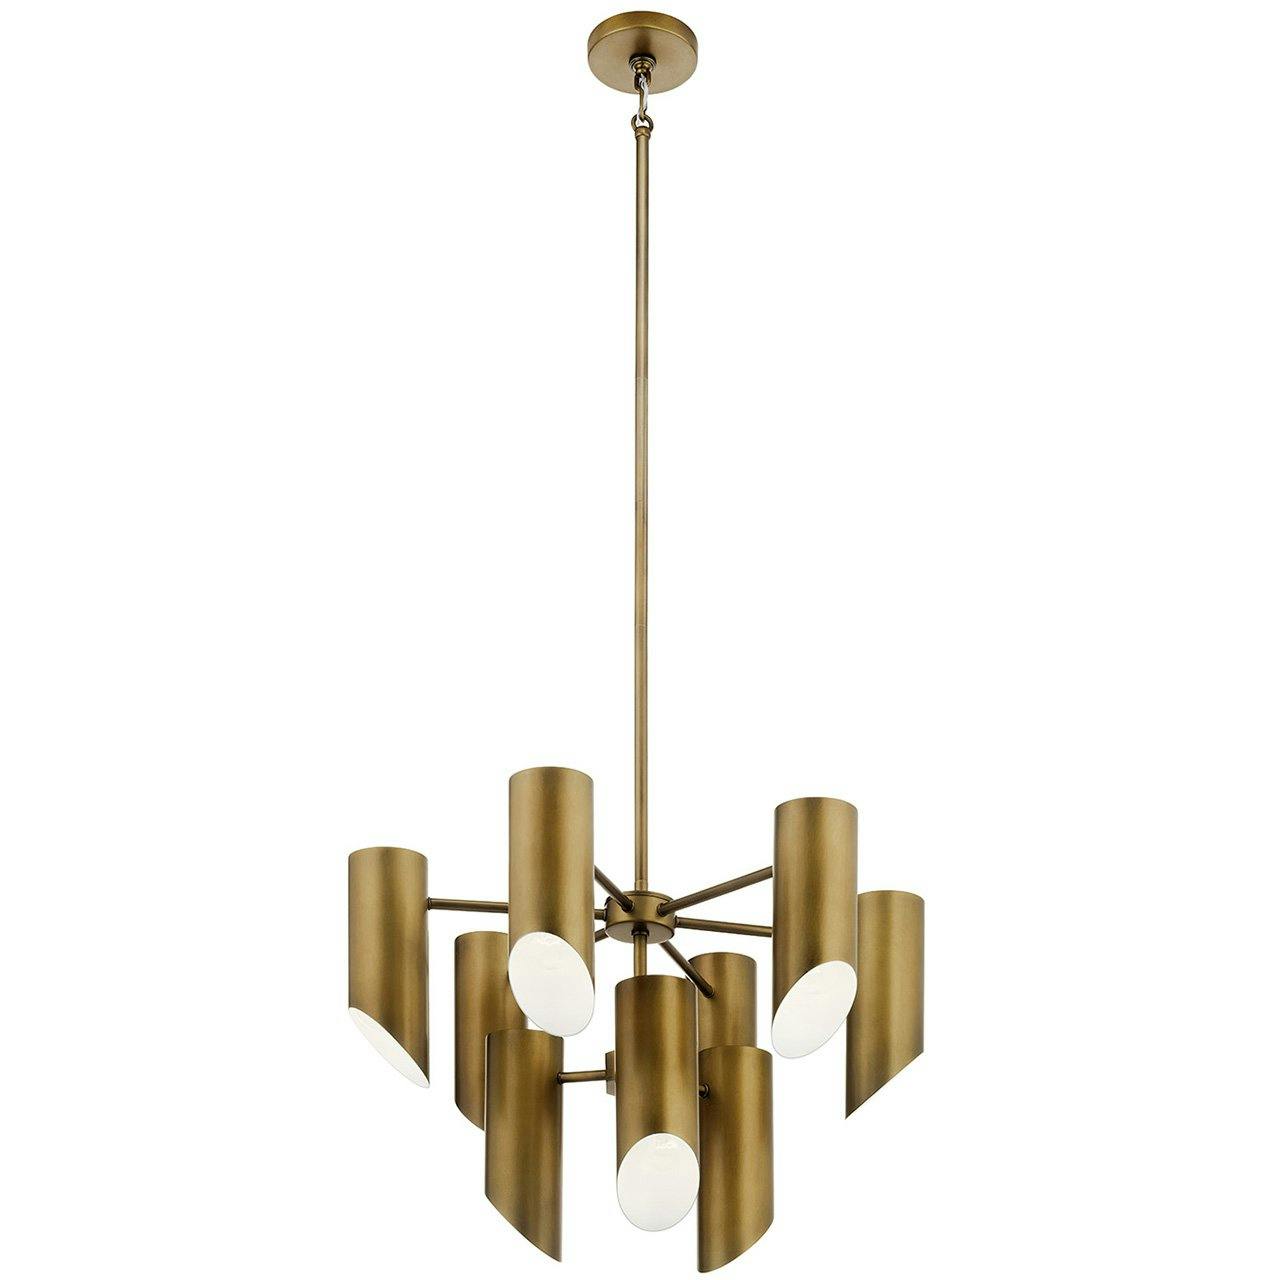 Trentino 9 Light Chandelier Natural Brass on a white background